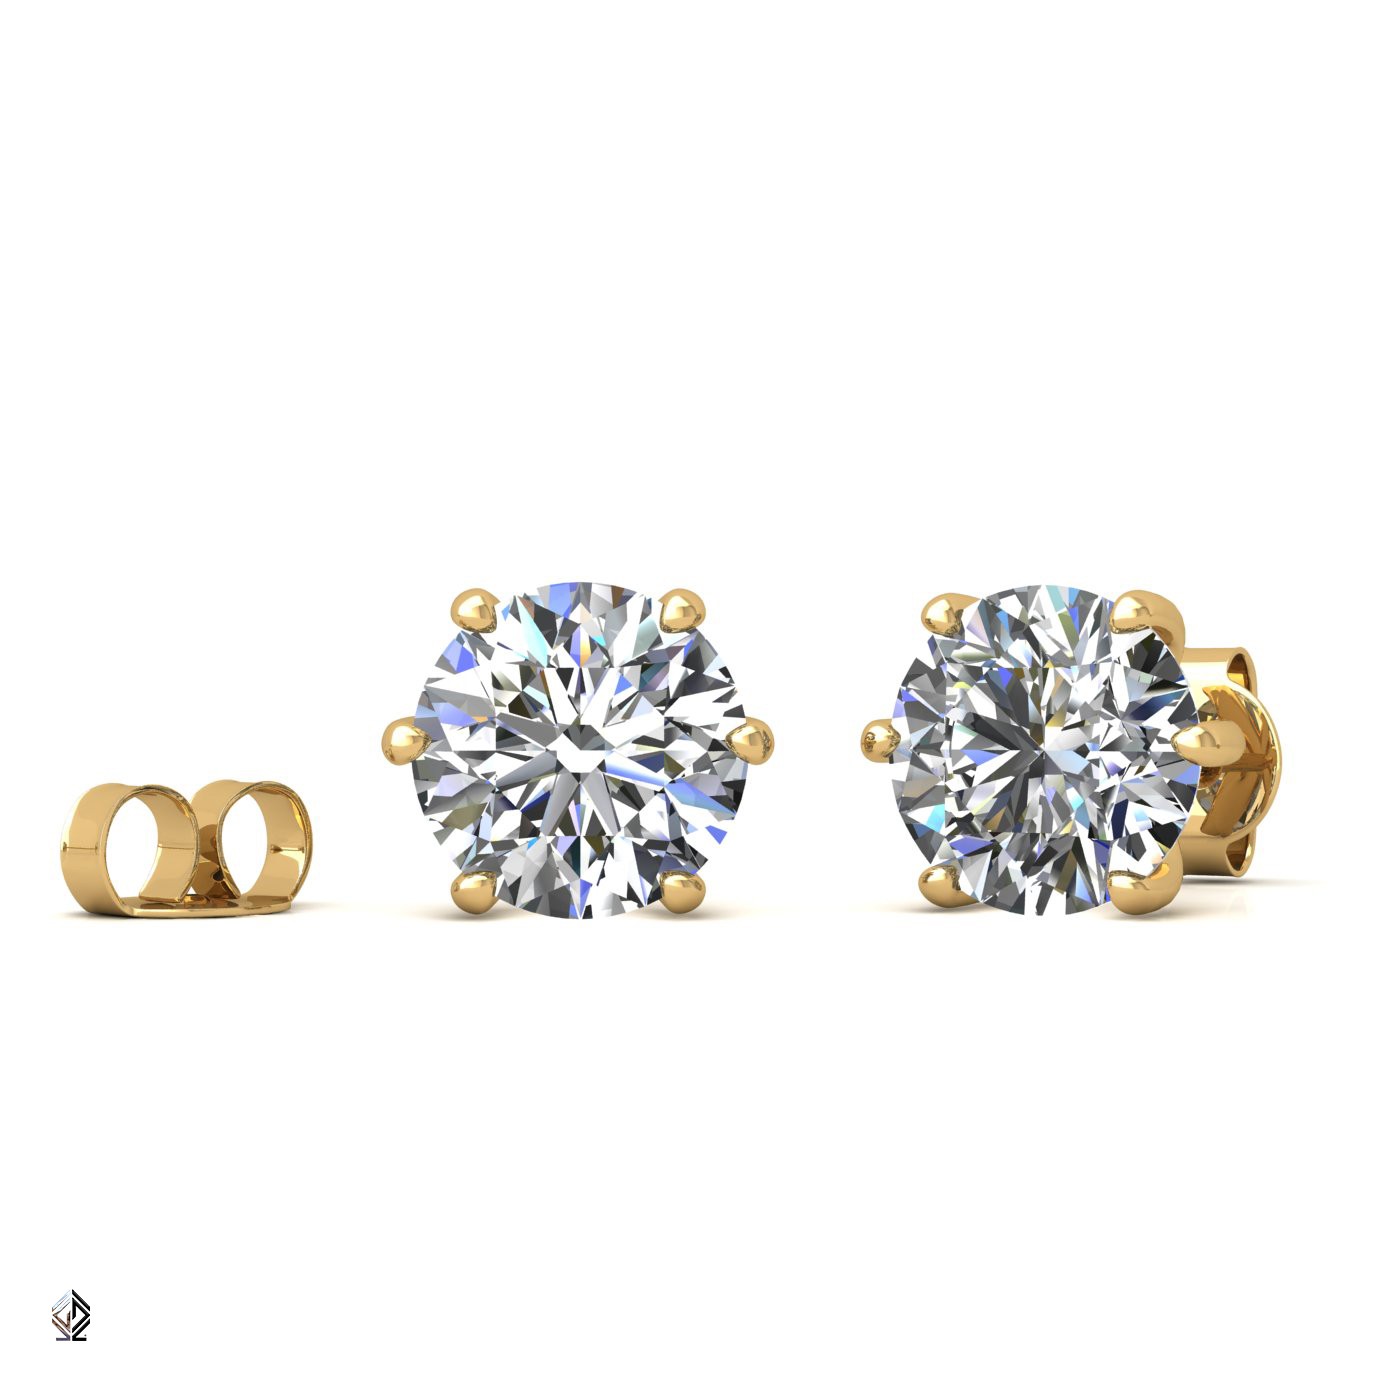 18k yellow gold 1.0 ct each (2,0 tcw) 6 prongs round shape diamond earrings Photos & images